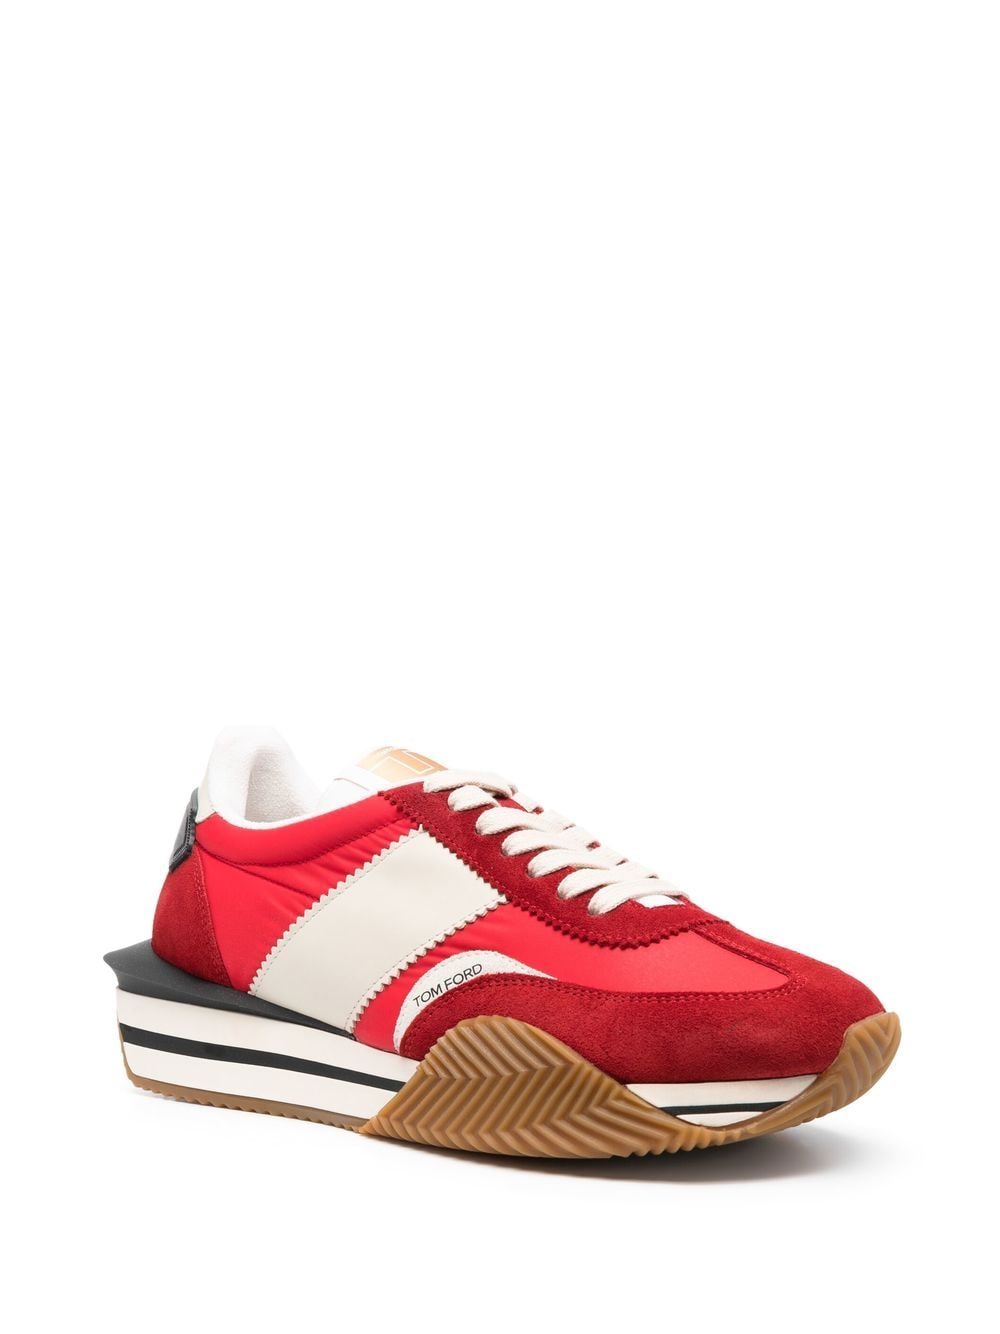 TOM FORD James low-top Sneakers - Farfetch